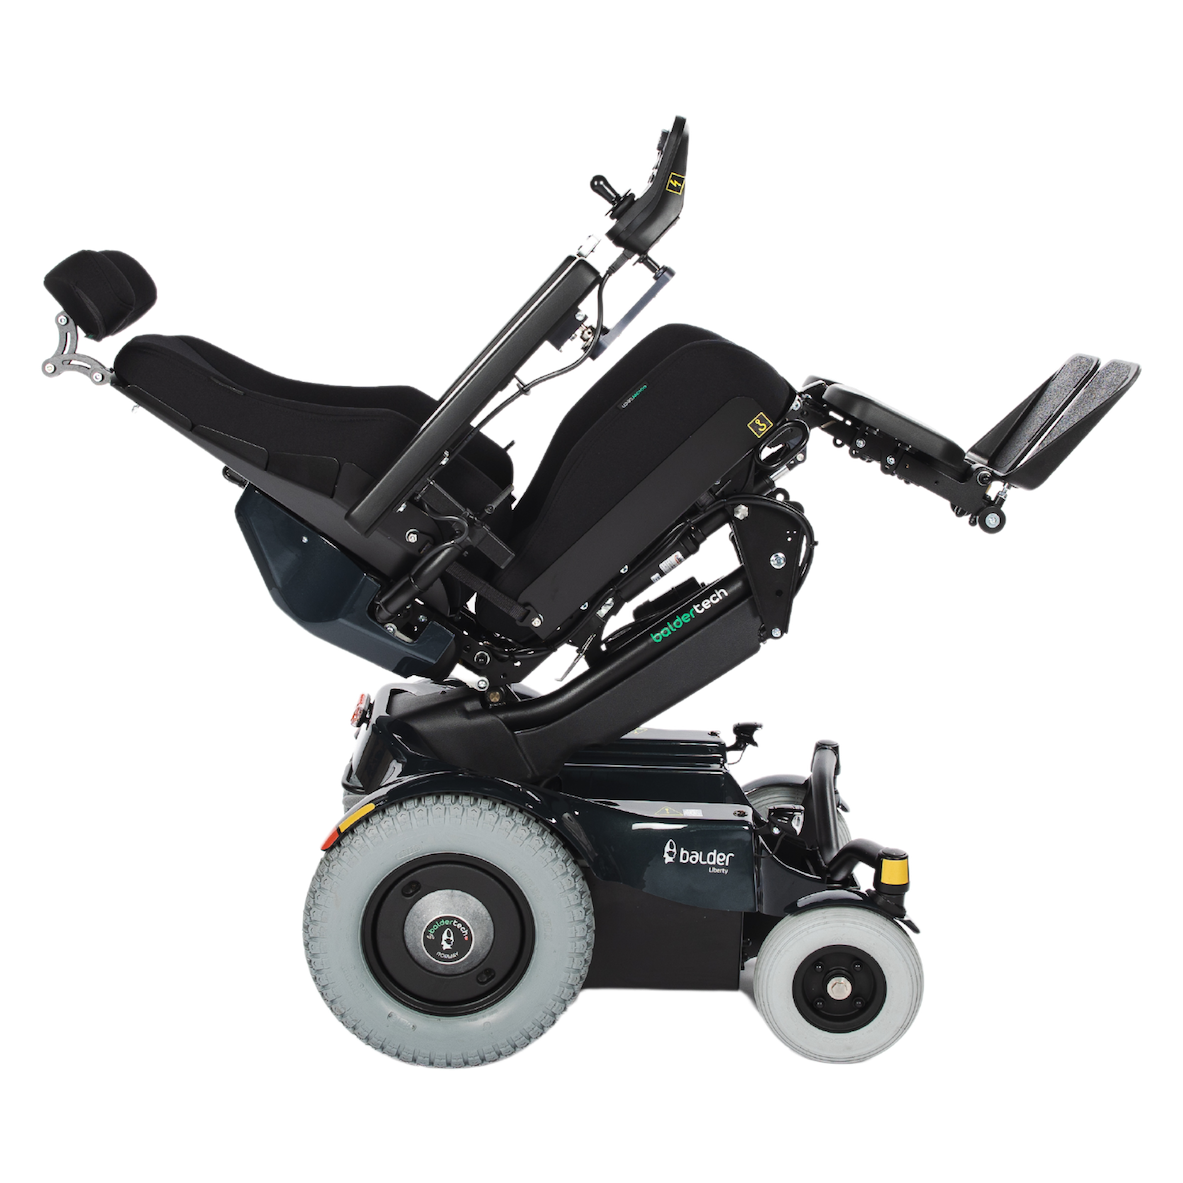 A side view of the Balder Liberty L380 powerchair in the reclined position. A rear wheel drive electric wheelchair.